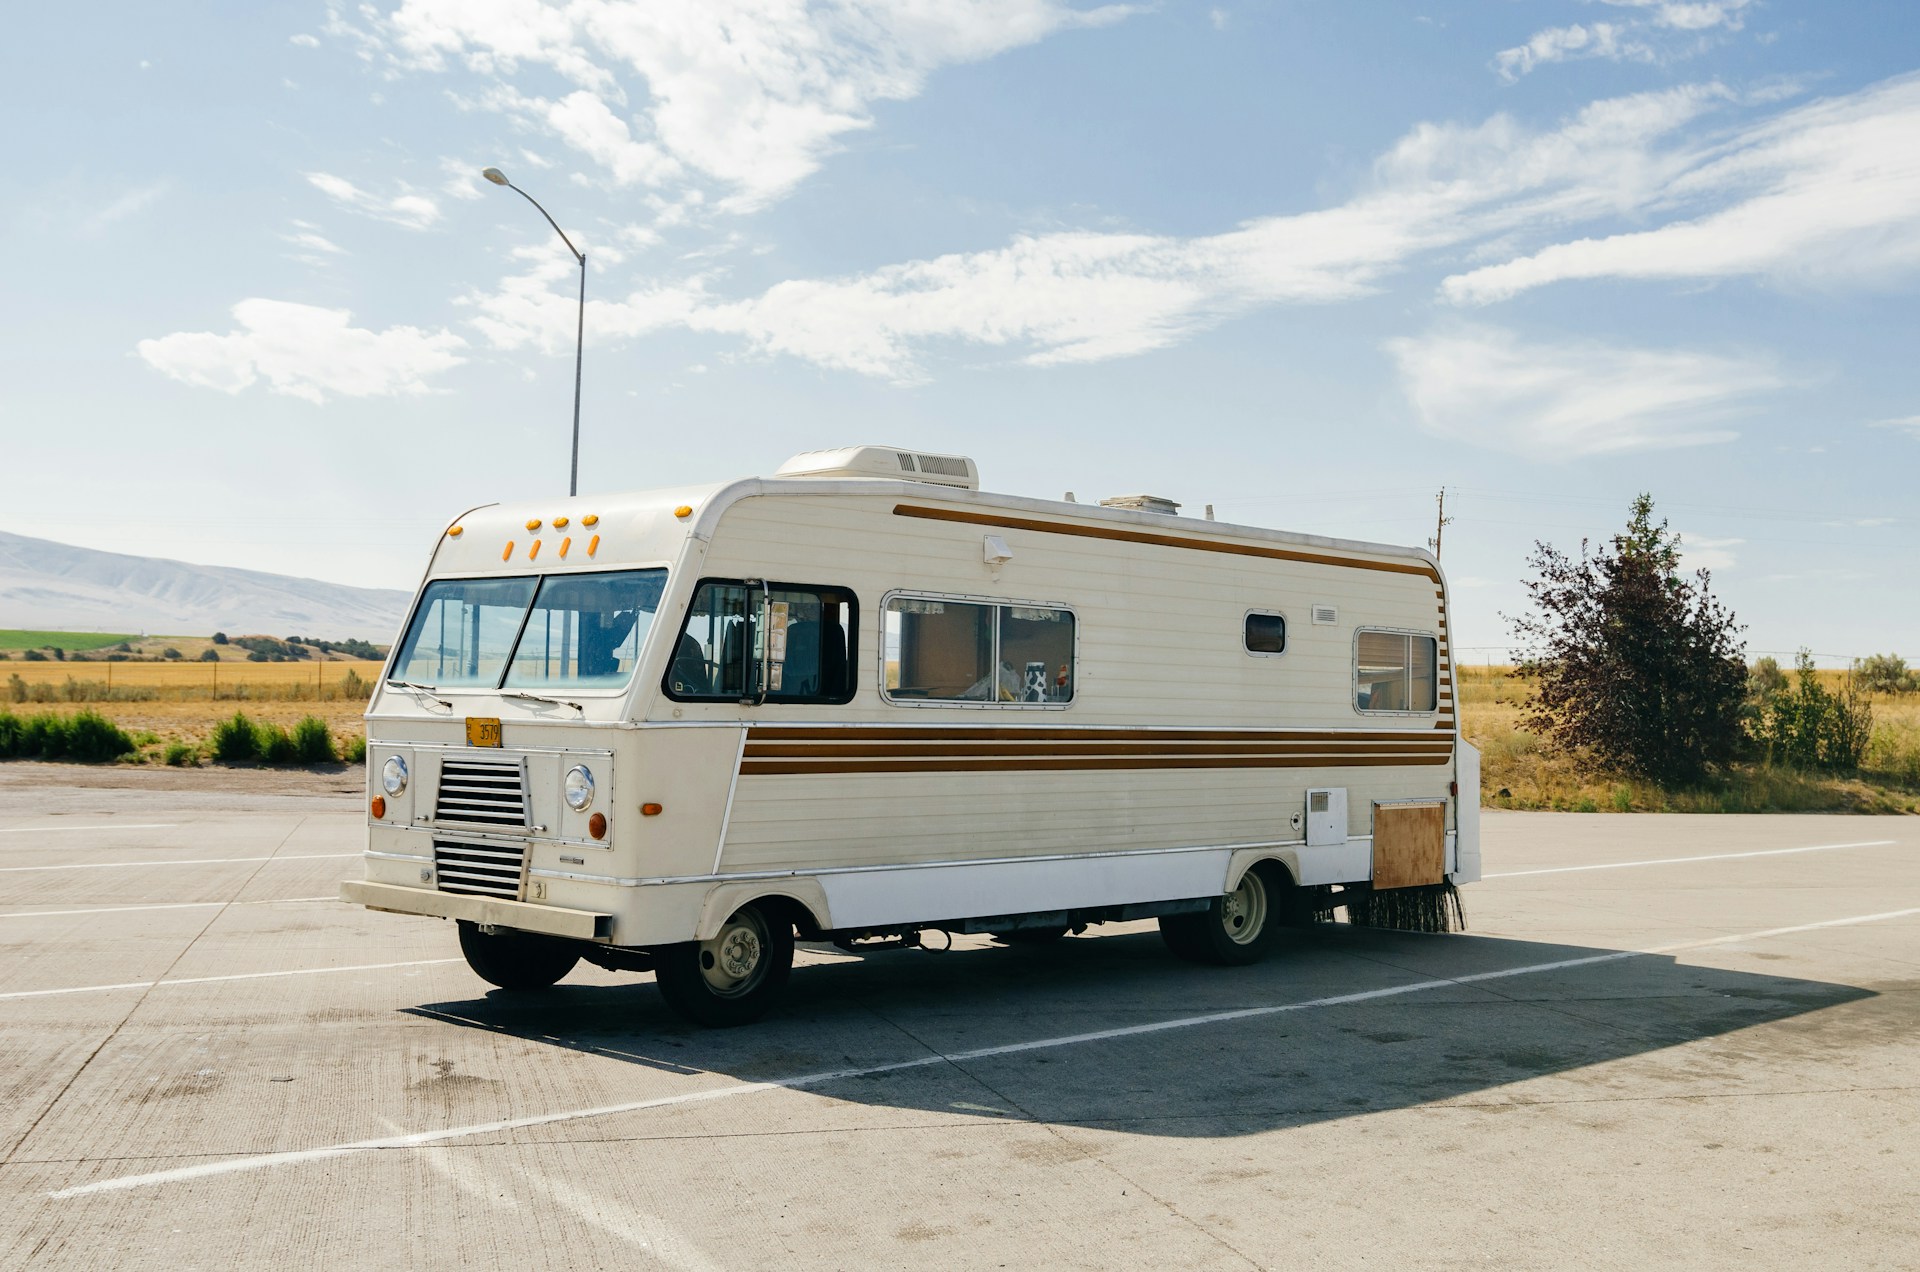 Do you stop at rest areas on a long road trip? Is it safe?